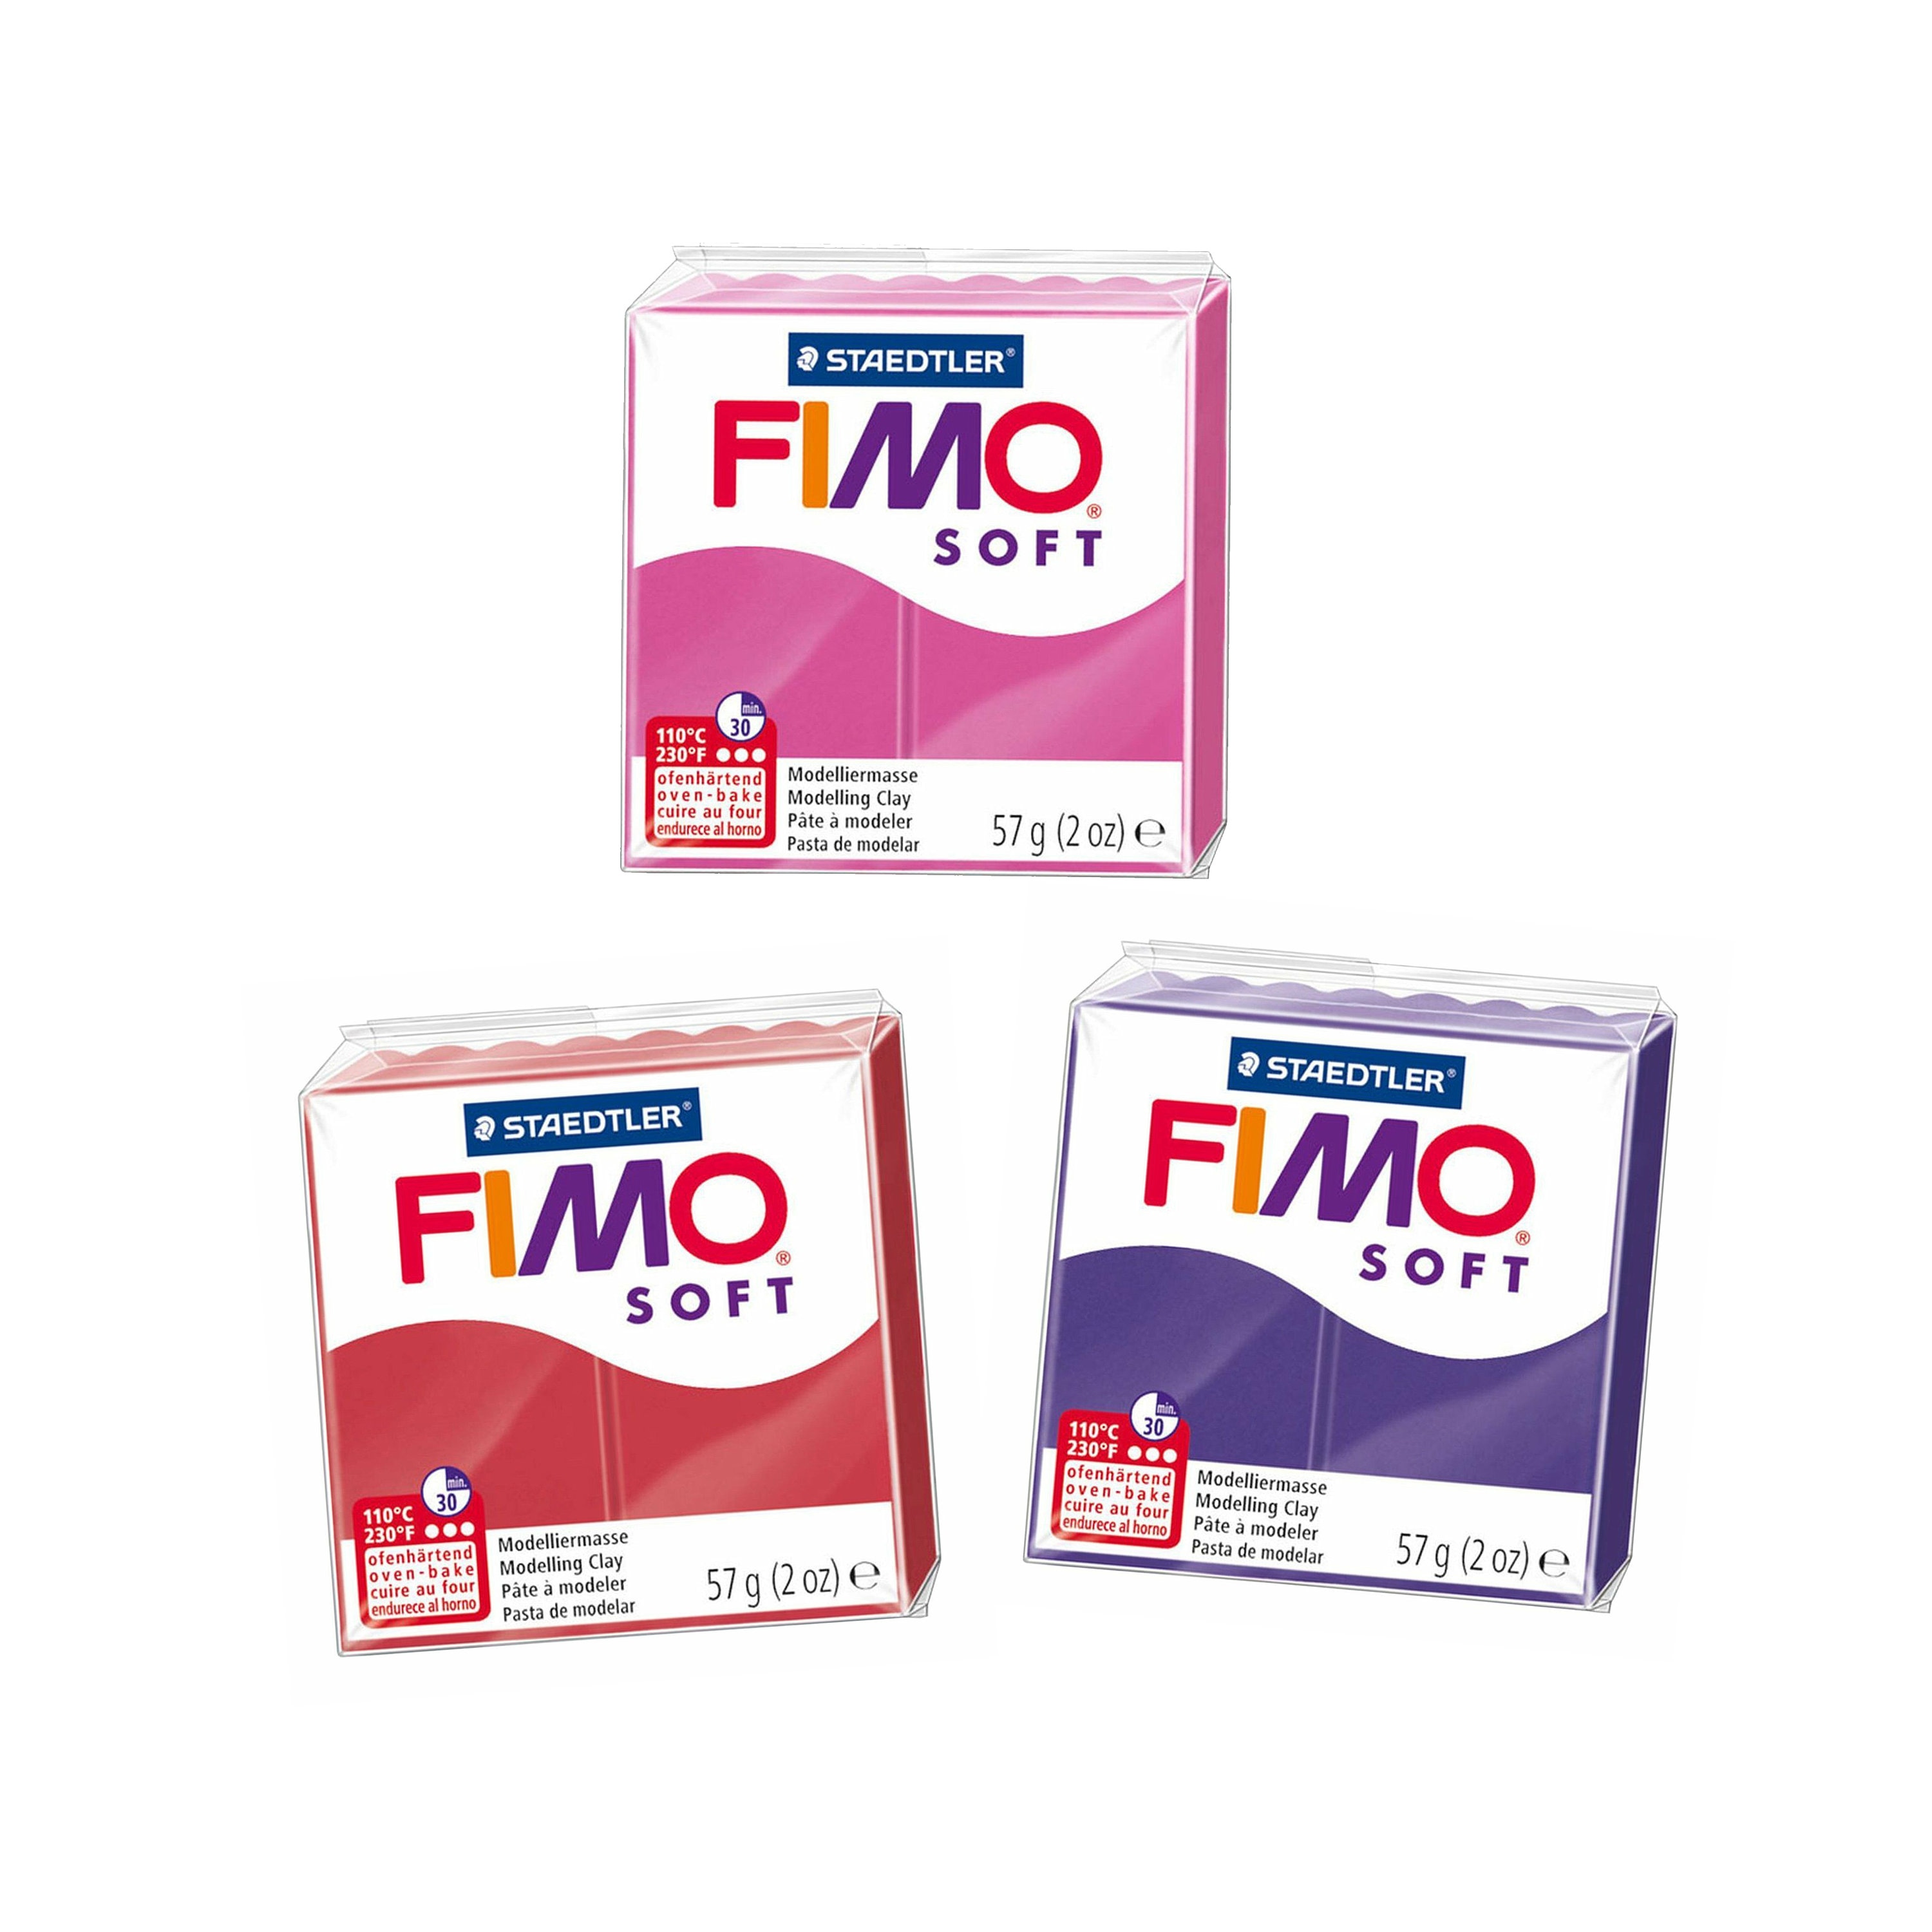 FIMO Polymer Clay Modelling Clay Soft Pale Pink 3 Pack Arts and Crafts DIY  Oven-bake Clay Moulding Sculpting Craft Supplies 